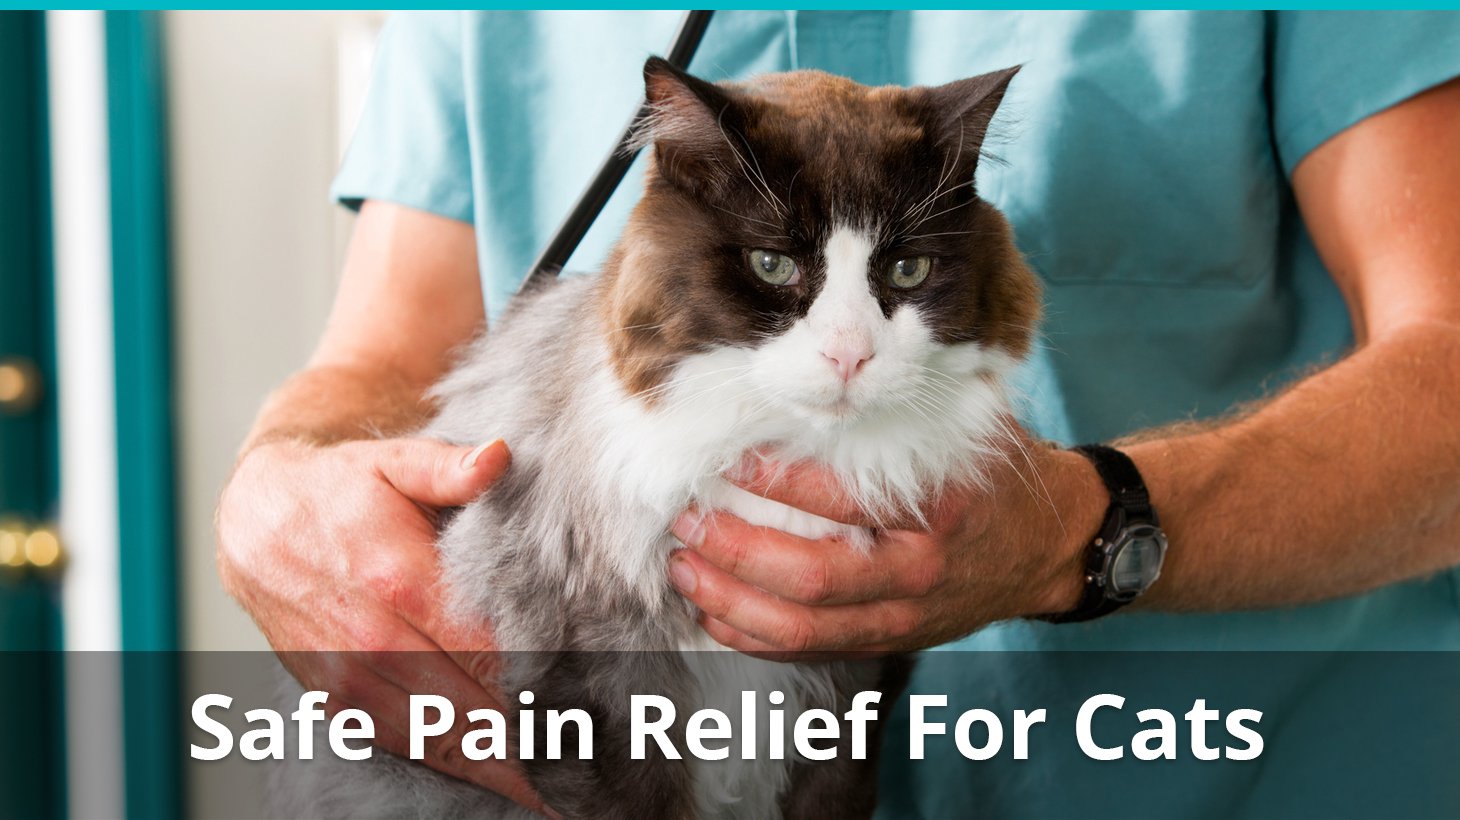 Safe Pain Relief For Cats What Can You Give A Cat For Pain At Home?